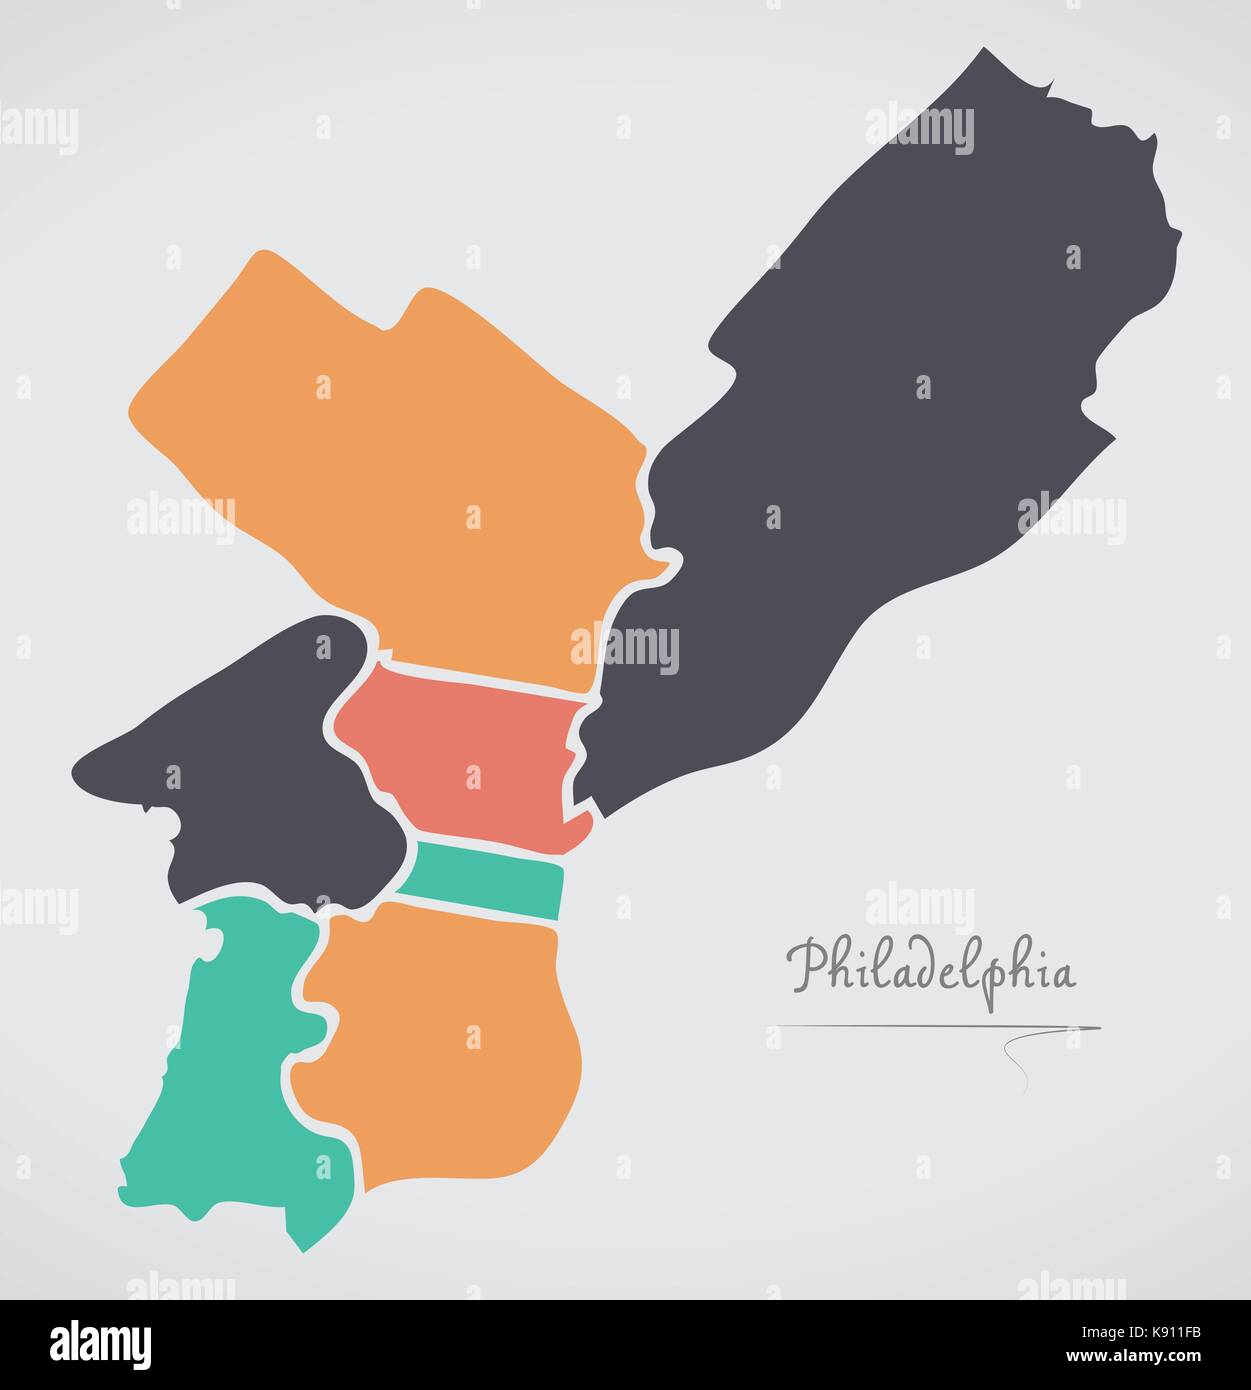 Philadelphia Map with boroughs and modern round shapes Stock Vector